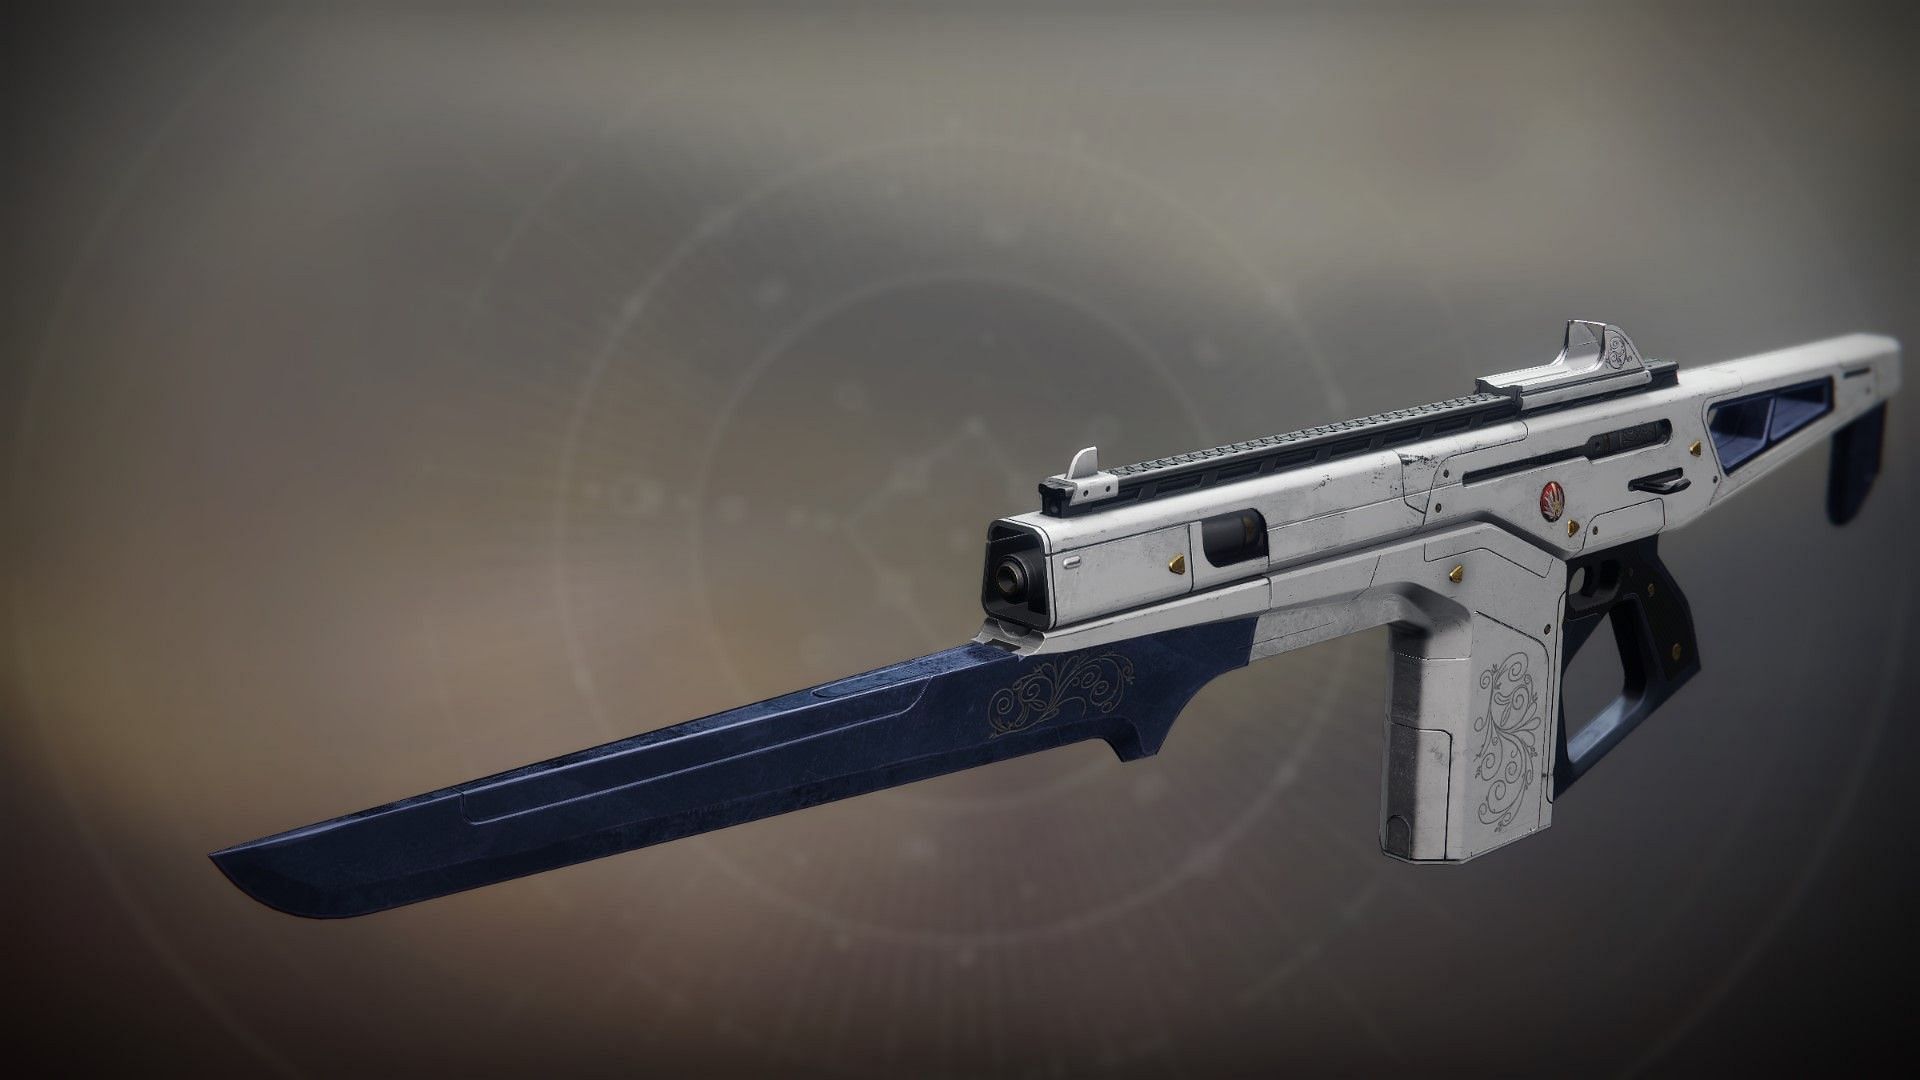 The Monte Carlo is the only Destiny 2 Exotic to have a bayonet attached to it.